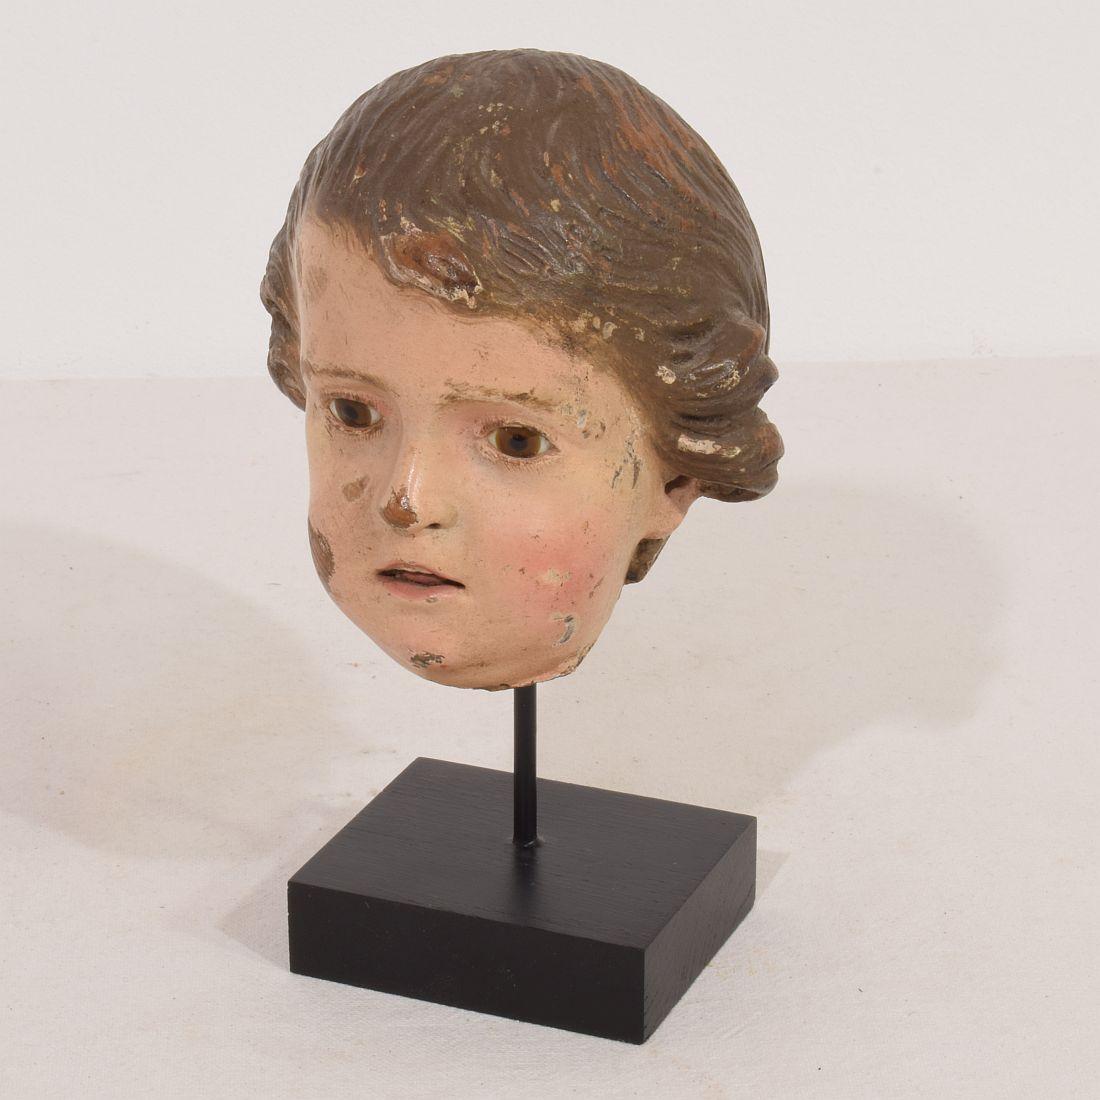 Stunning handcarved wooden head fragment with beautiful expression and glass eyes,
Italy, circa 1750-1800. Beautiful example of 18th century craftsmanship.
Weathered 
Measurement here below is inclusive the wooden base.